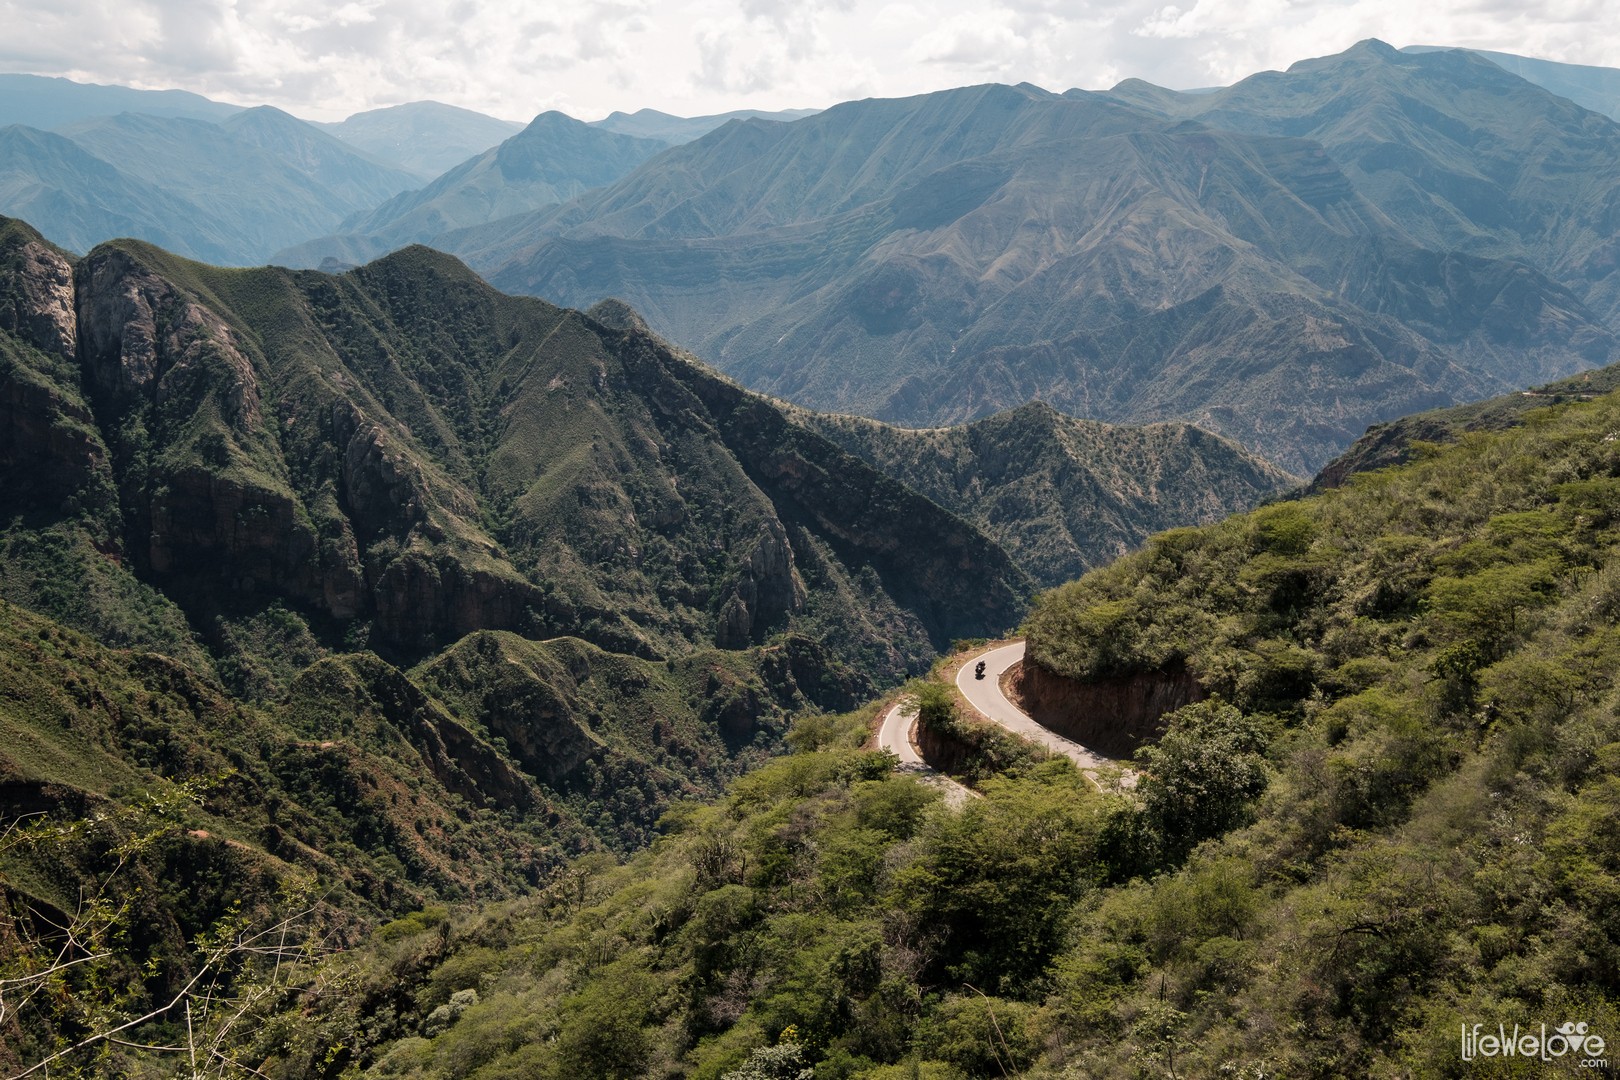 The road from Chachaoyas to Cajamarca